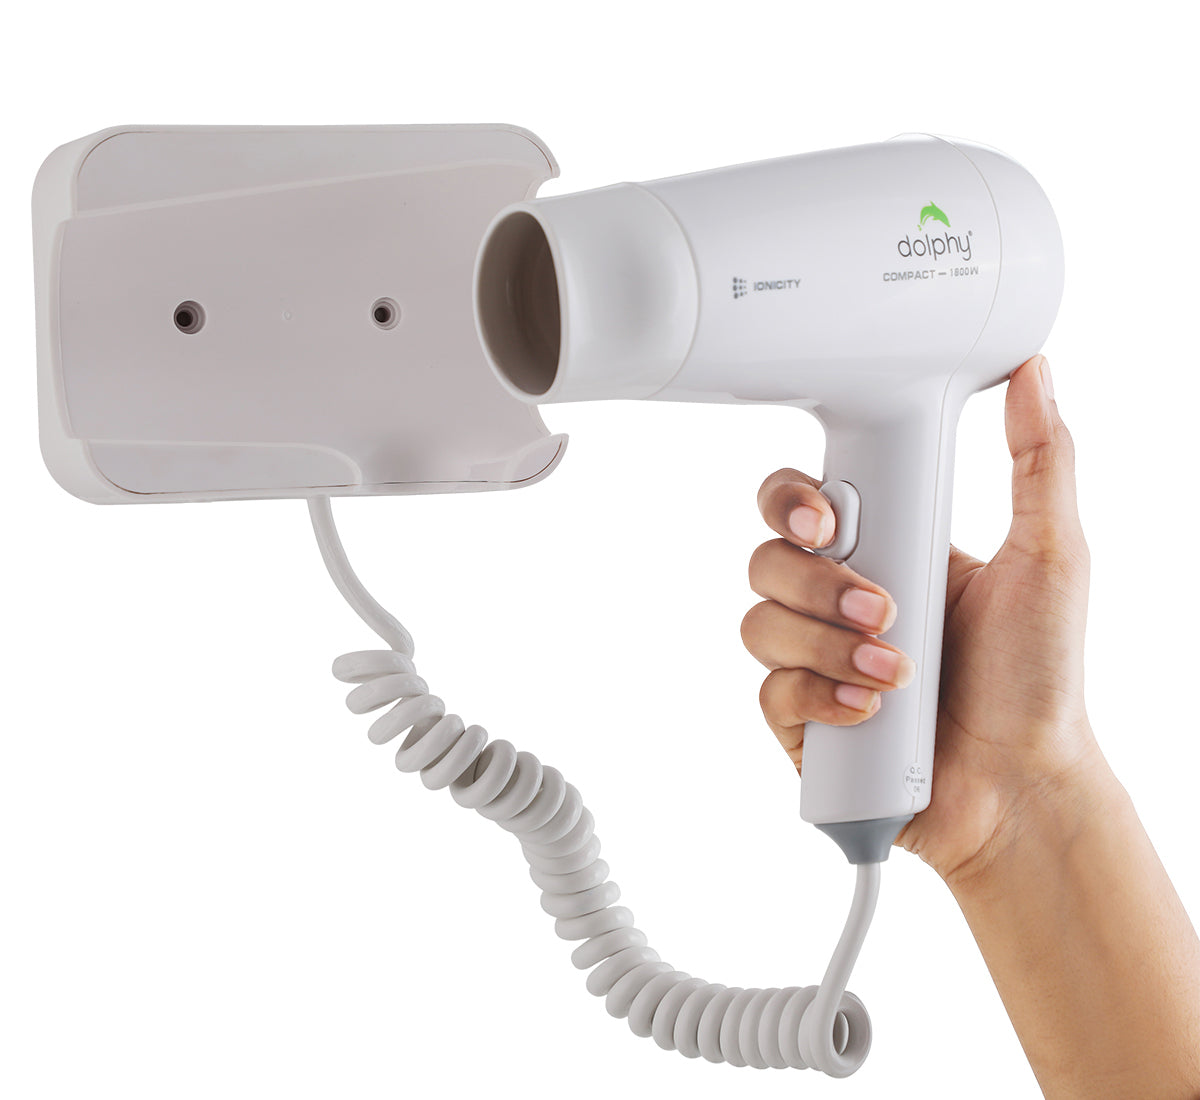 Plaza Wall Mount Hair Dryer 1800W - Hot and Cold